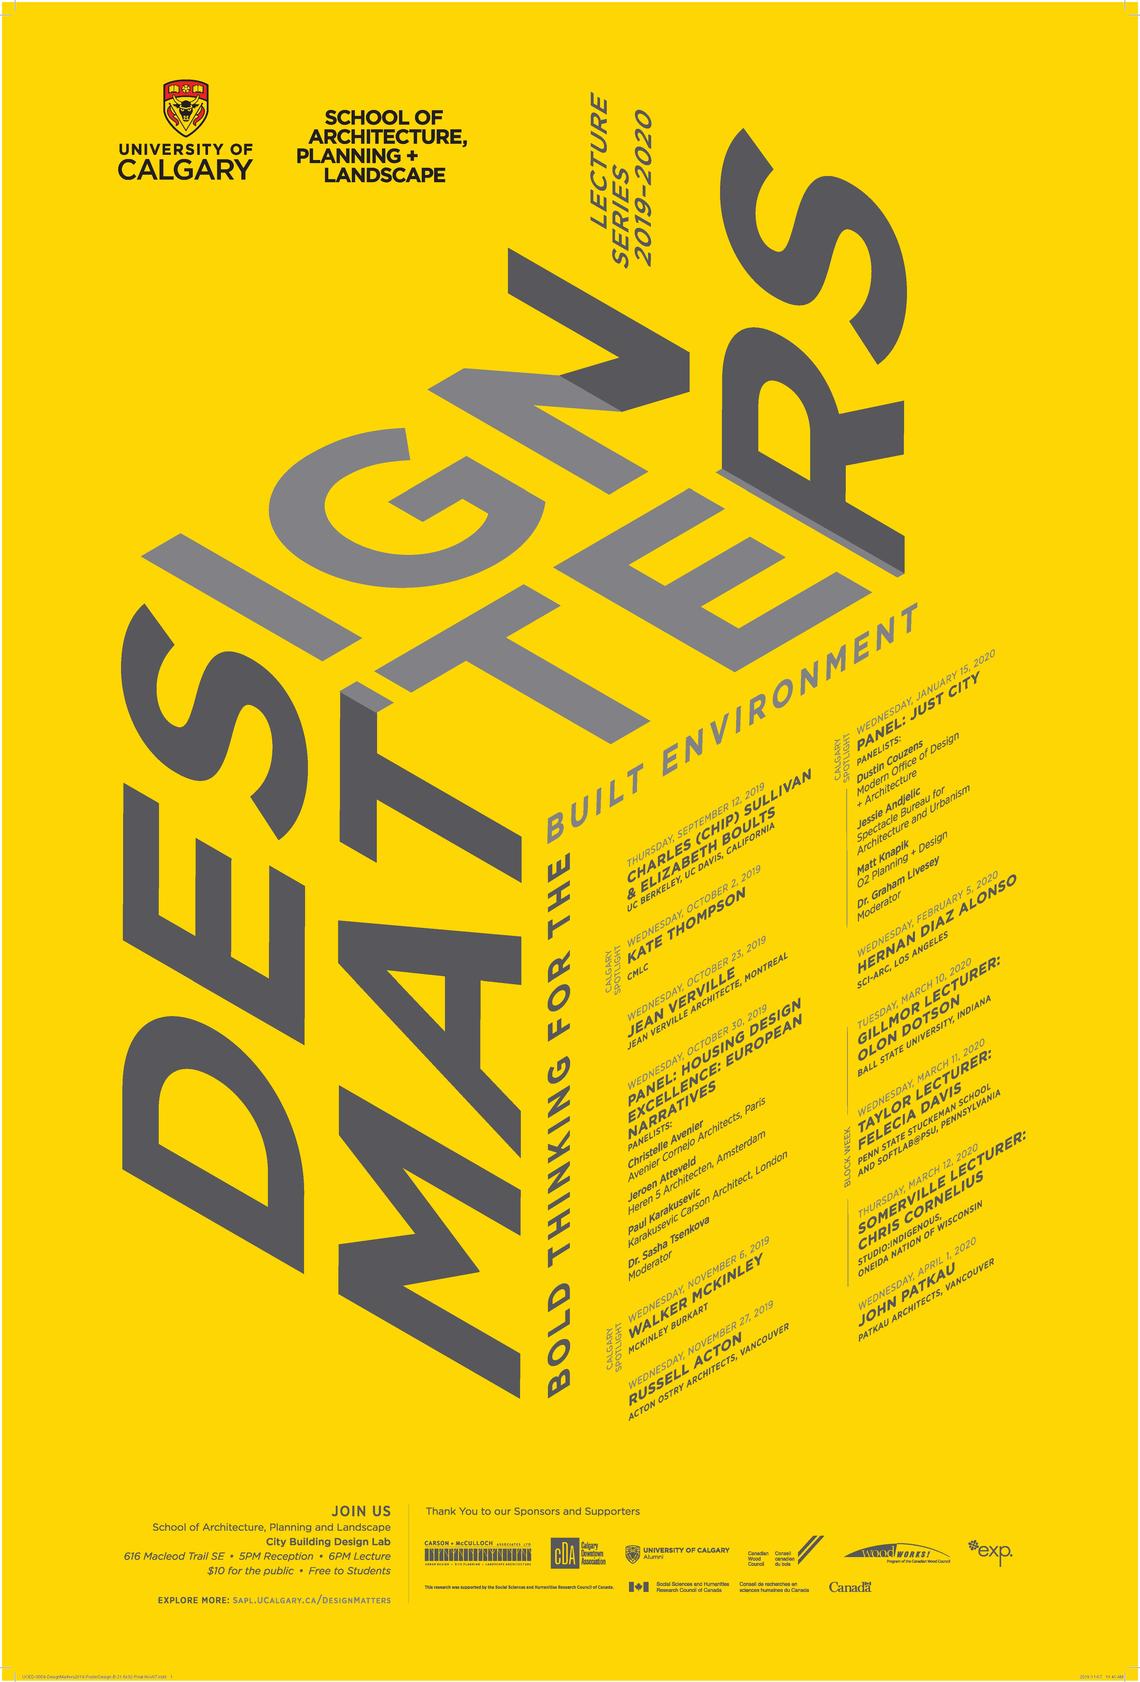 Design Matters Lectures Series 2019/20 Poster